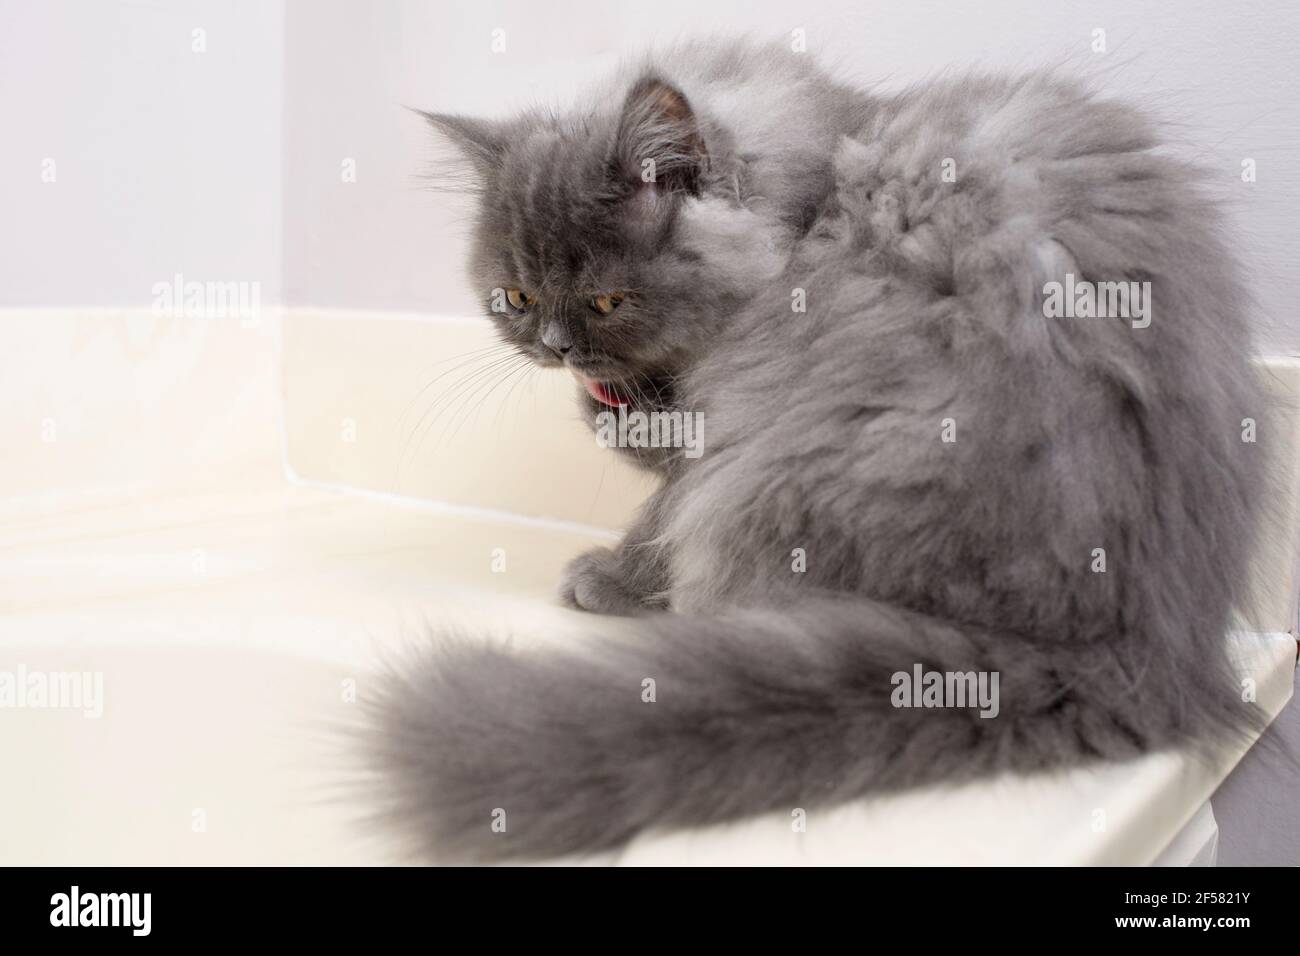 Funny grumpy looking long haired grey kitten sitting on a countertop washing his paw. Stock Photo